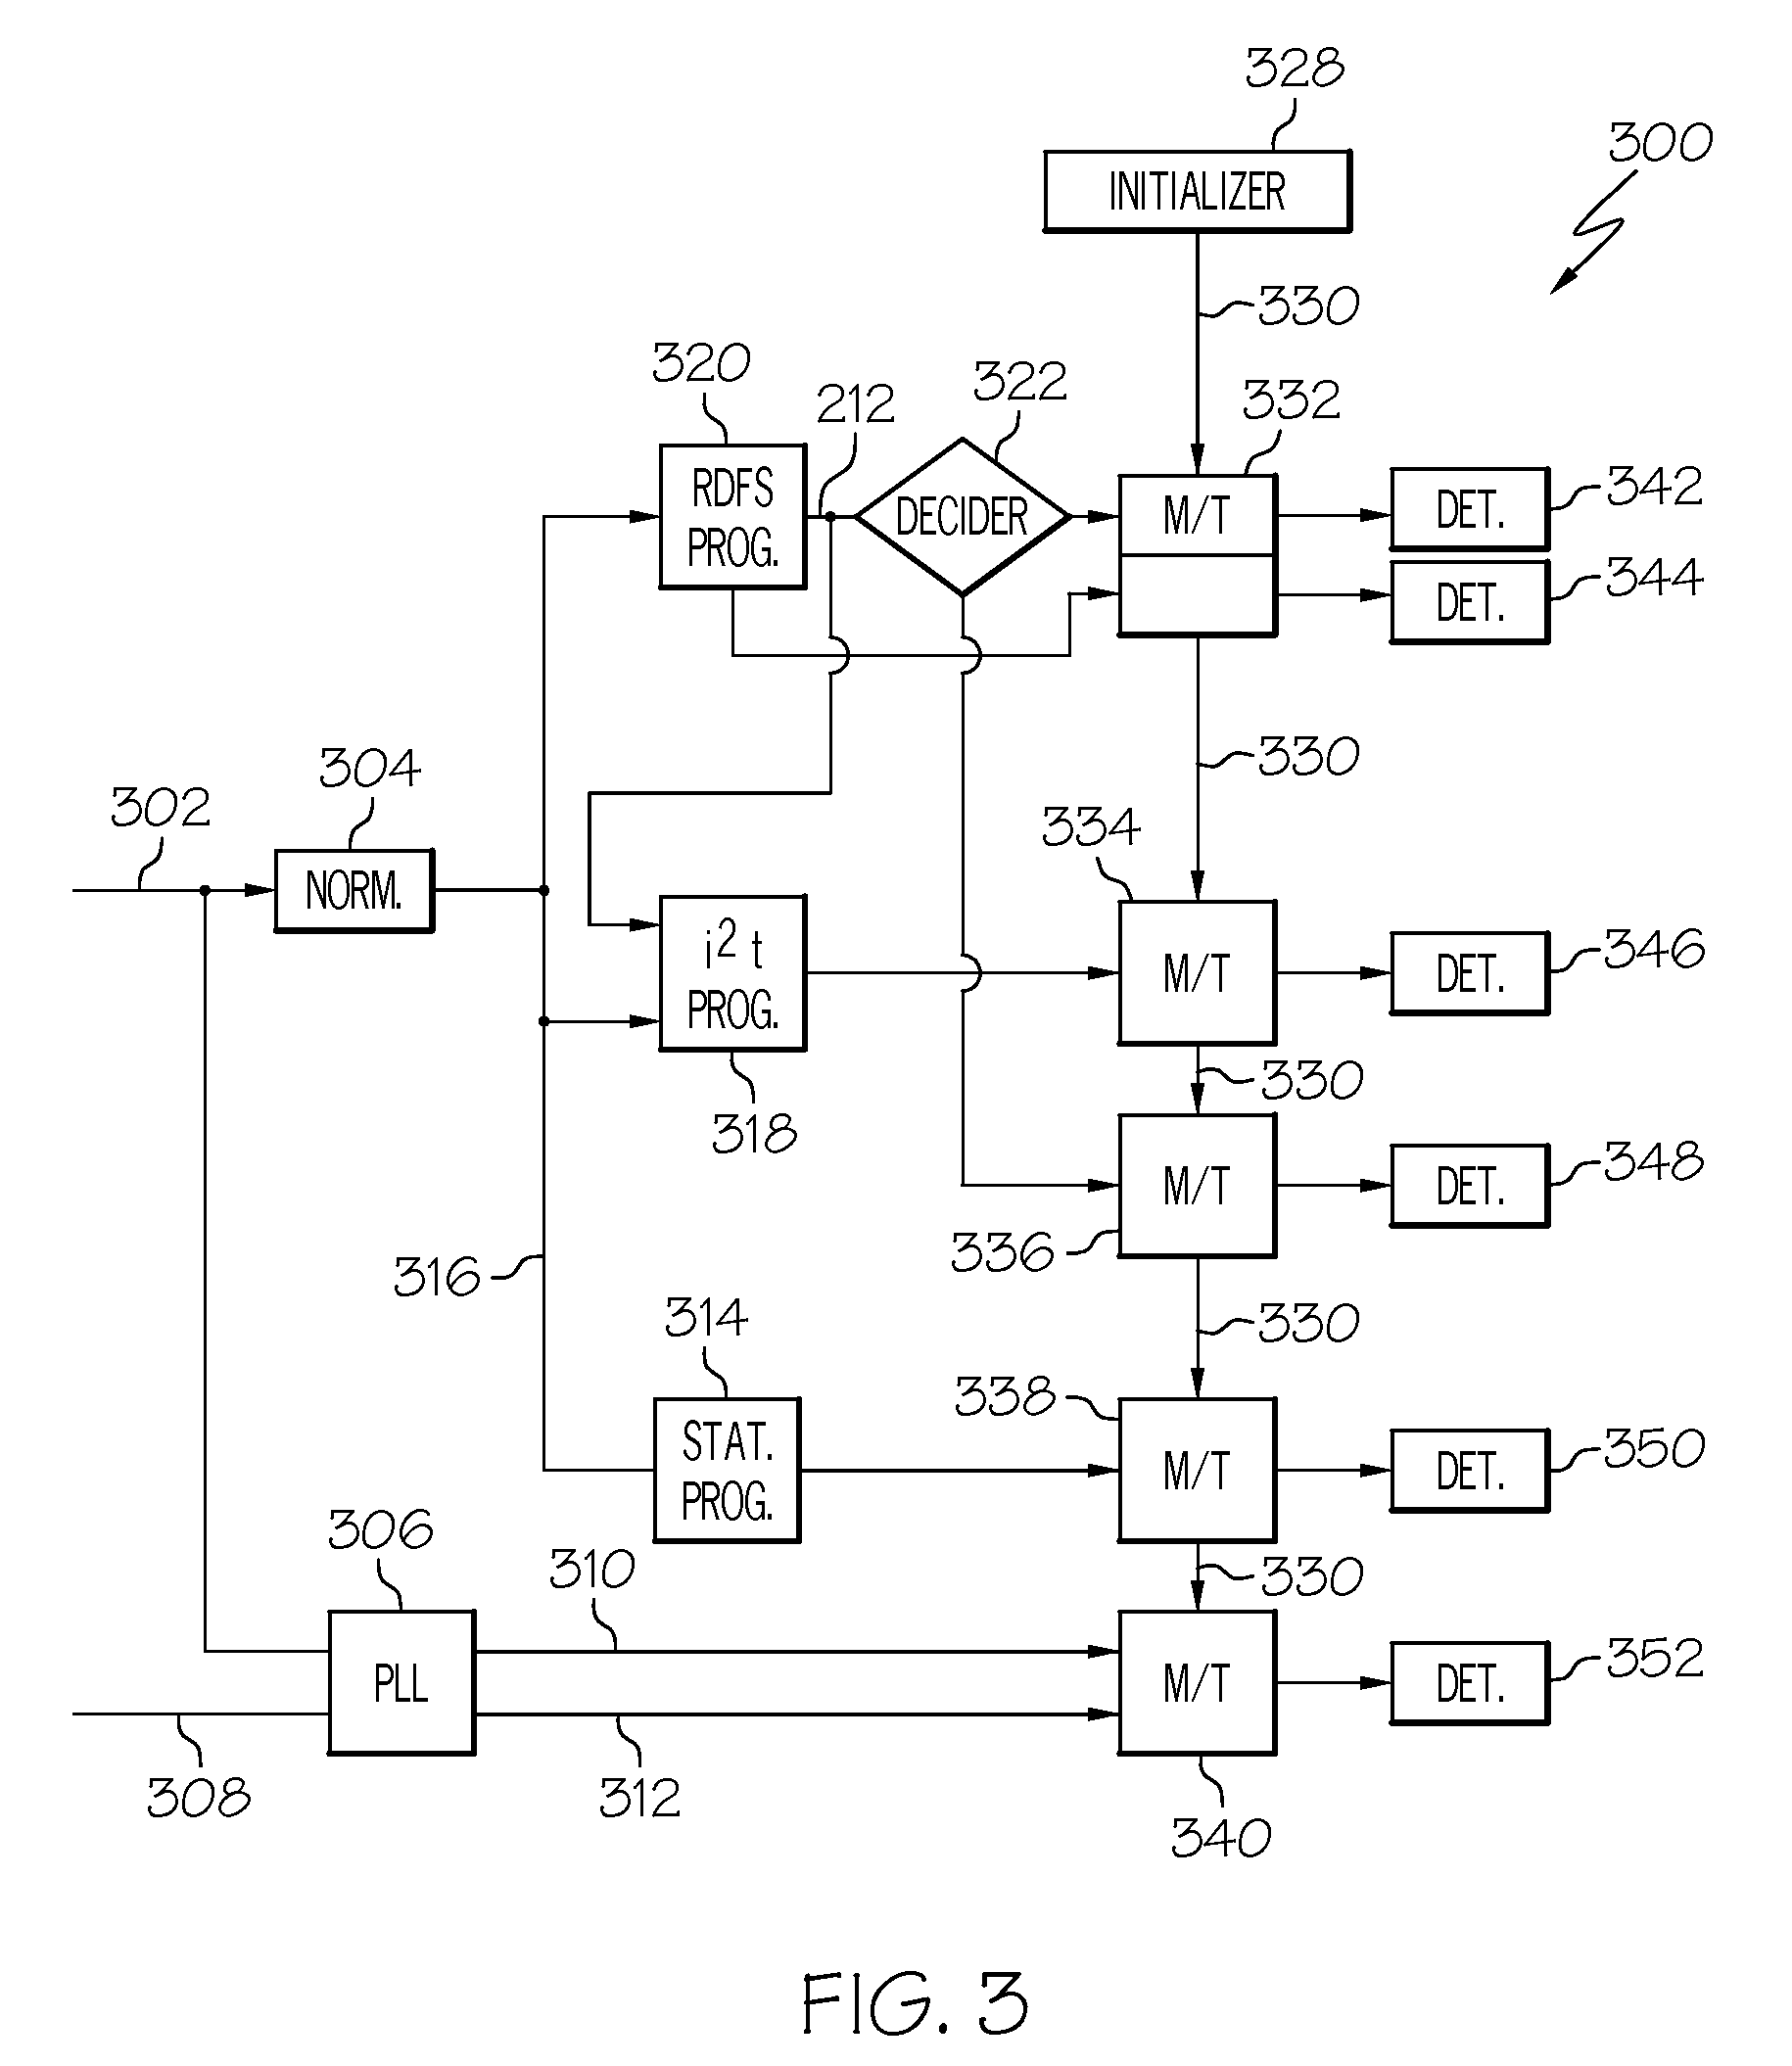 Method and apparatus for generalized AC and DC arc fault detection and protection